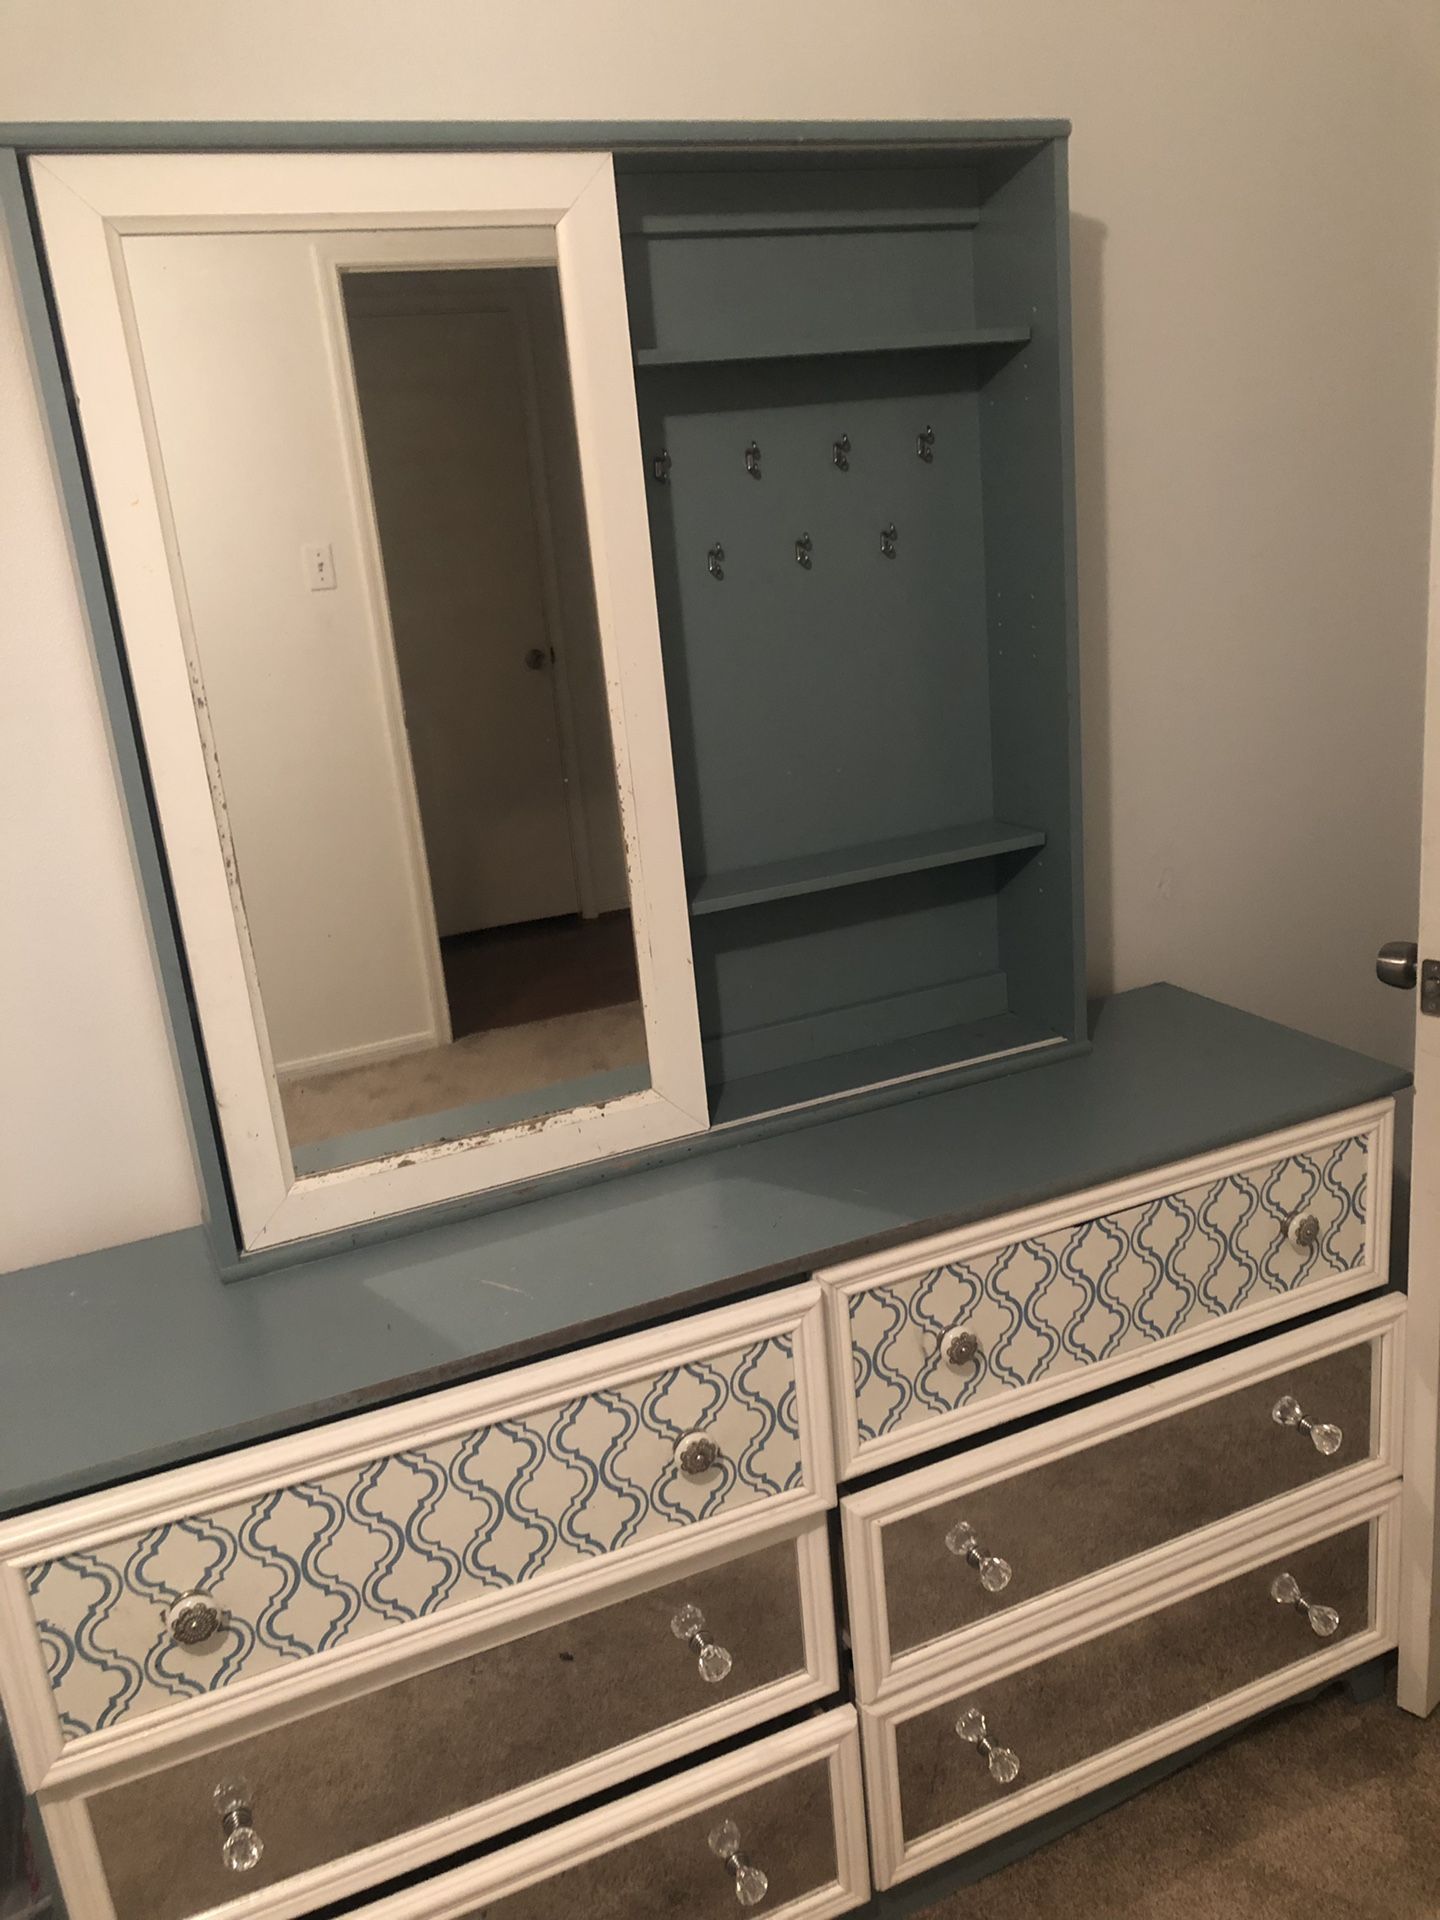 Blue vanity, small desk, and bed frame (price is 100% negotiable)